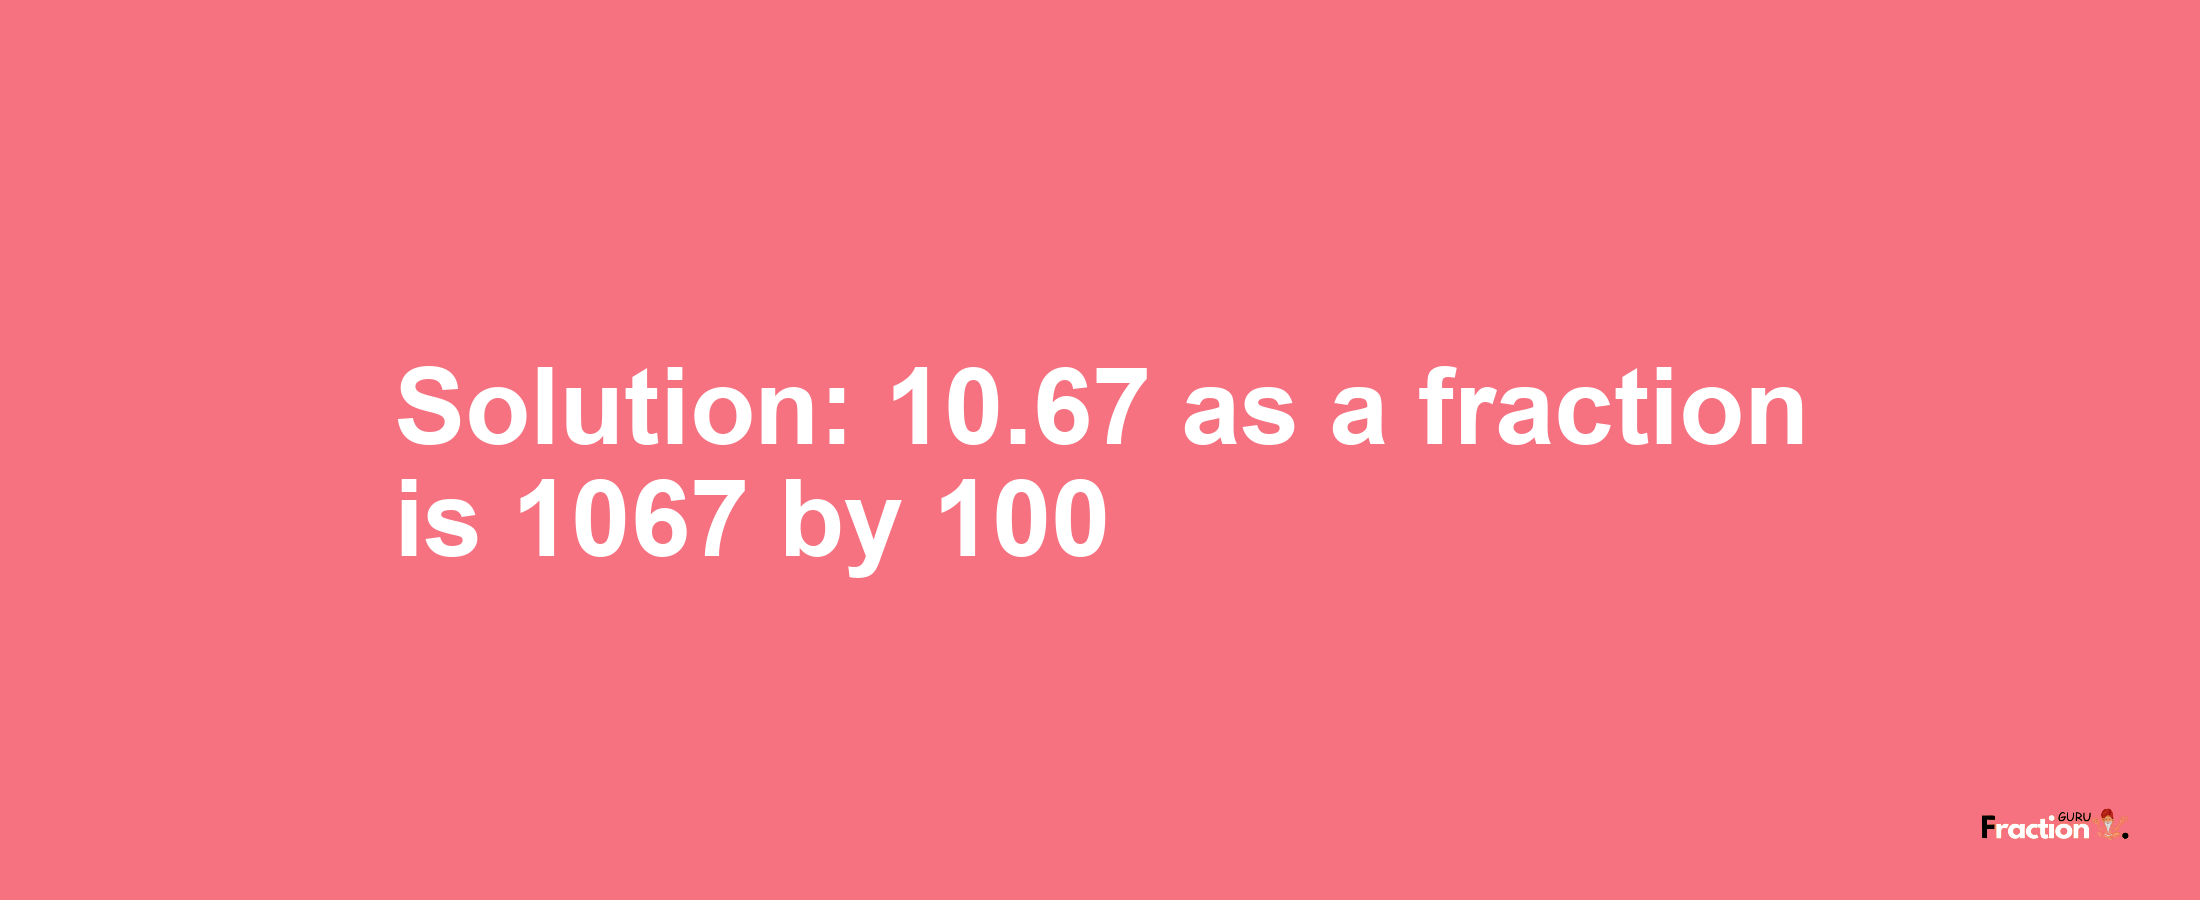 Solution:10.67 as a fraction is 1067/100